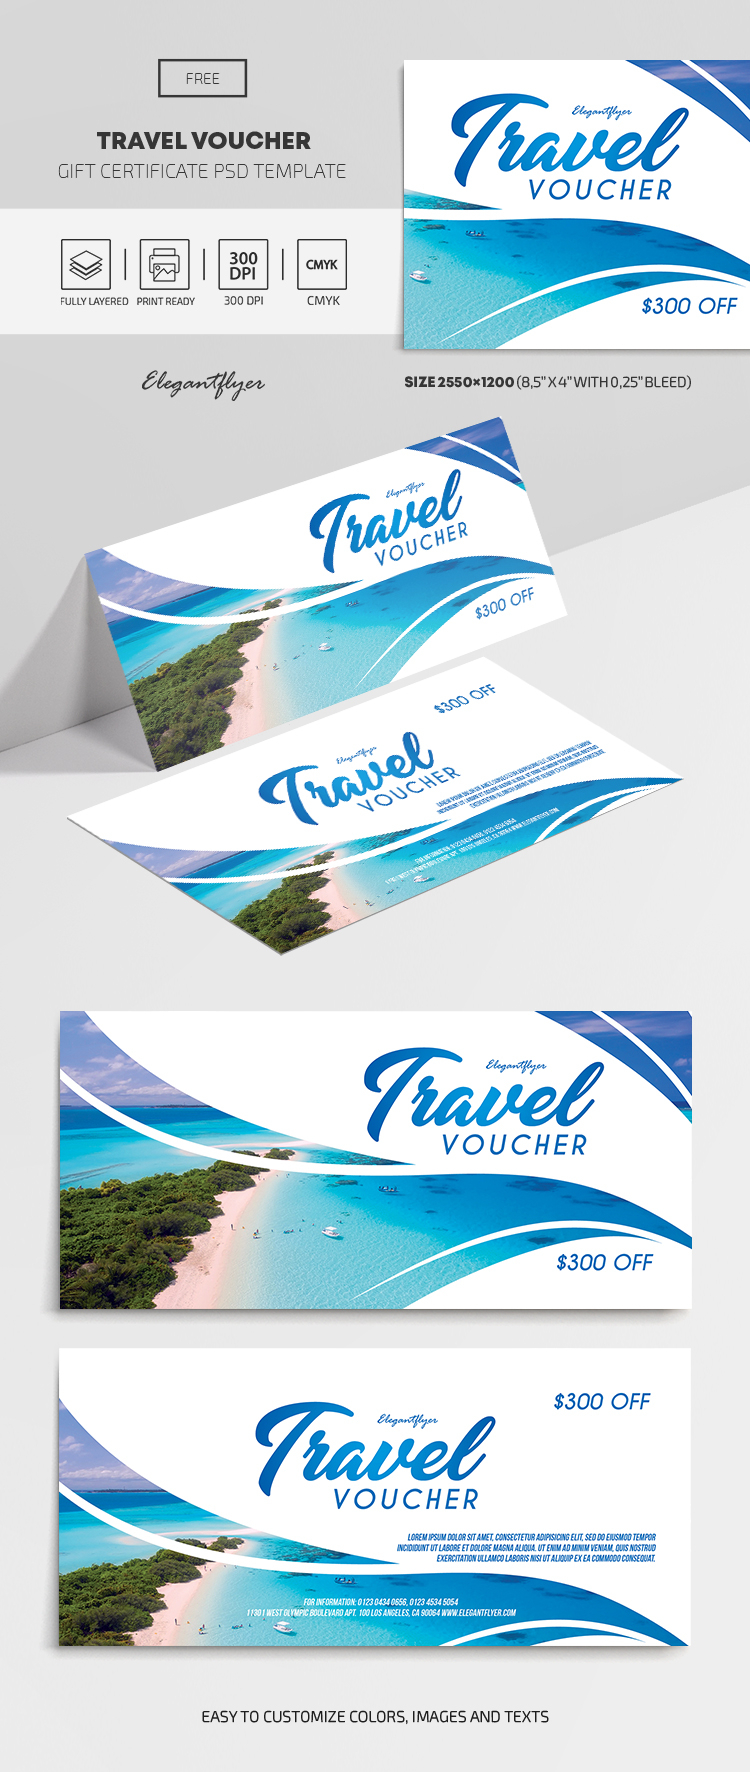 Travel Voucher – Free Gift Certificate Template – Pertaining To Free Travel Gift Certificate Template